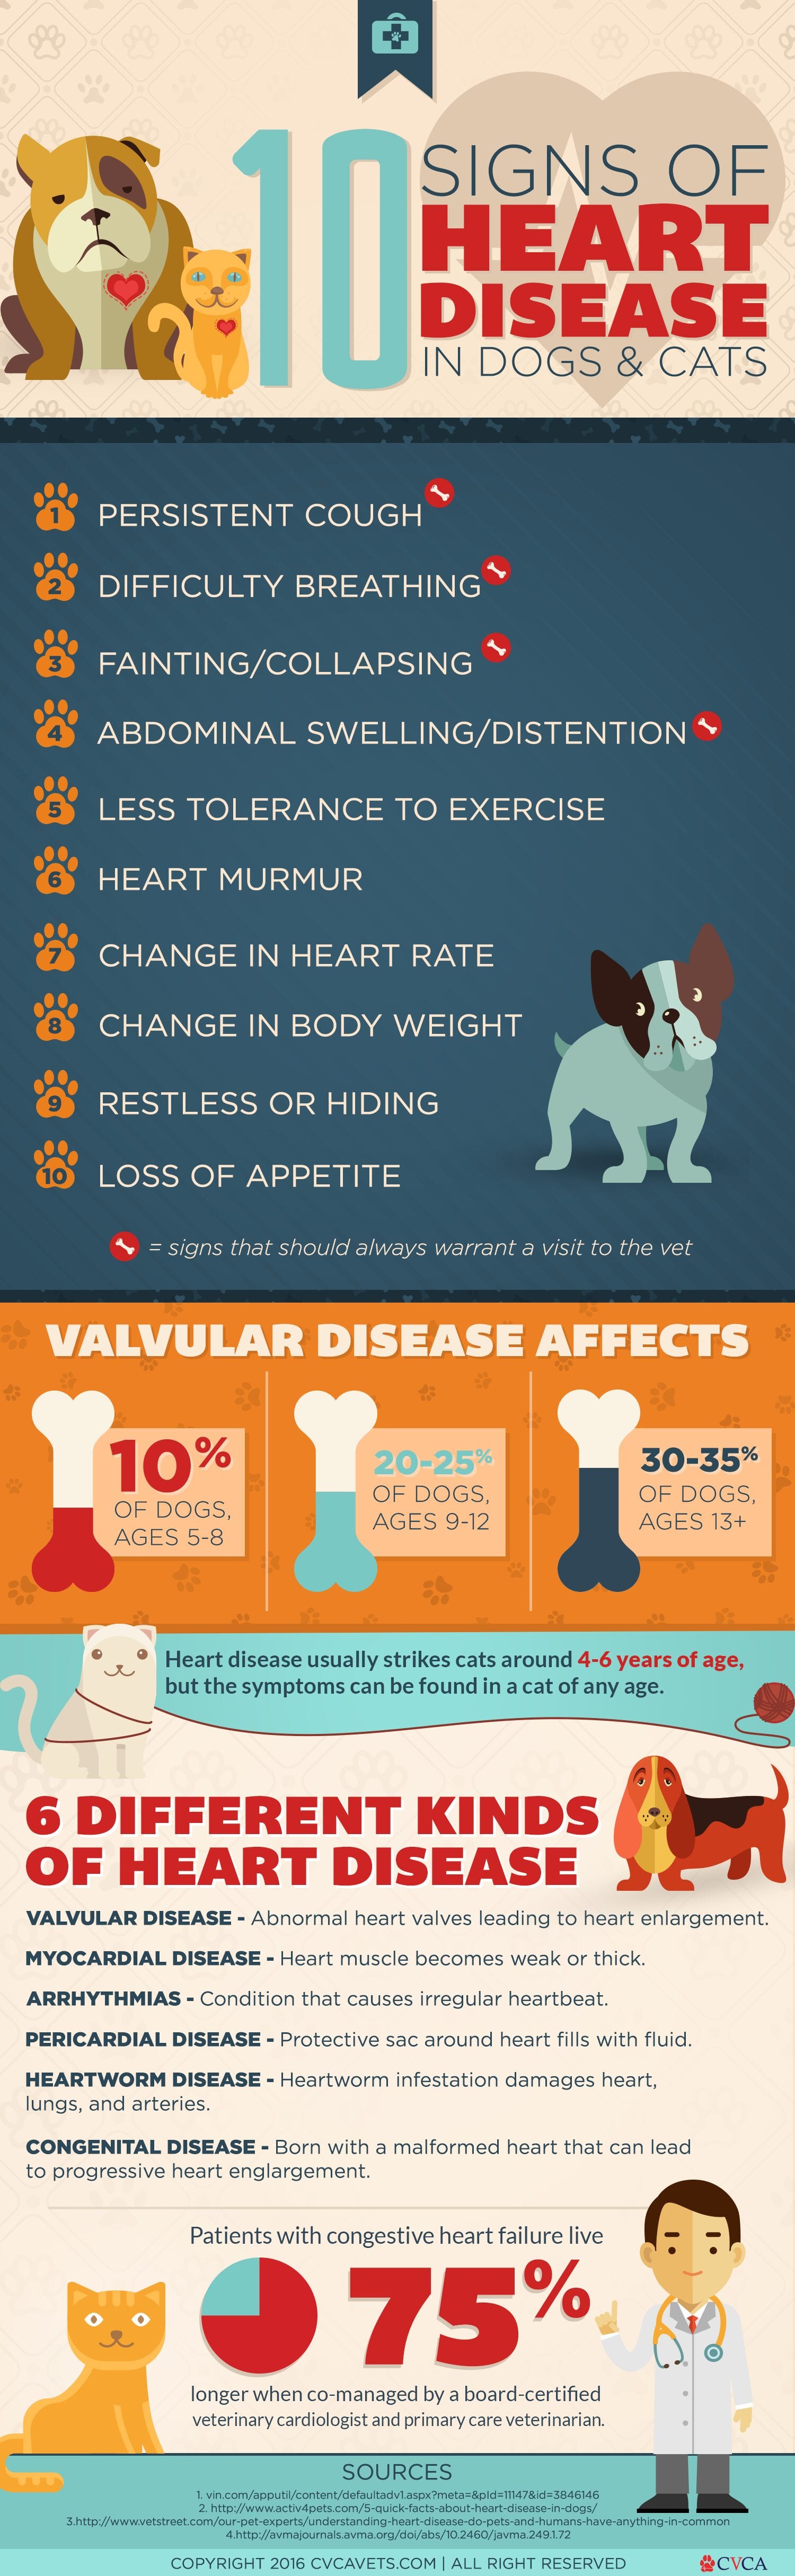 I. Introduction to Heart Disease in Dogs